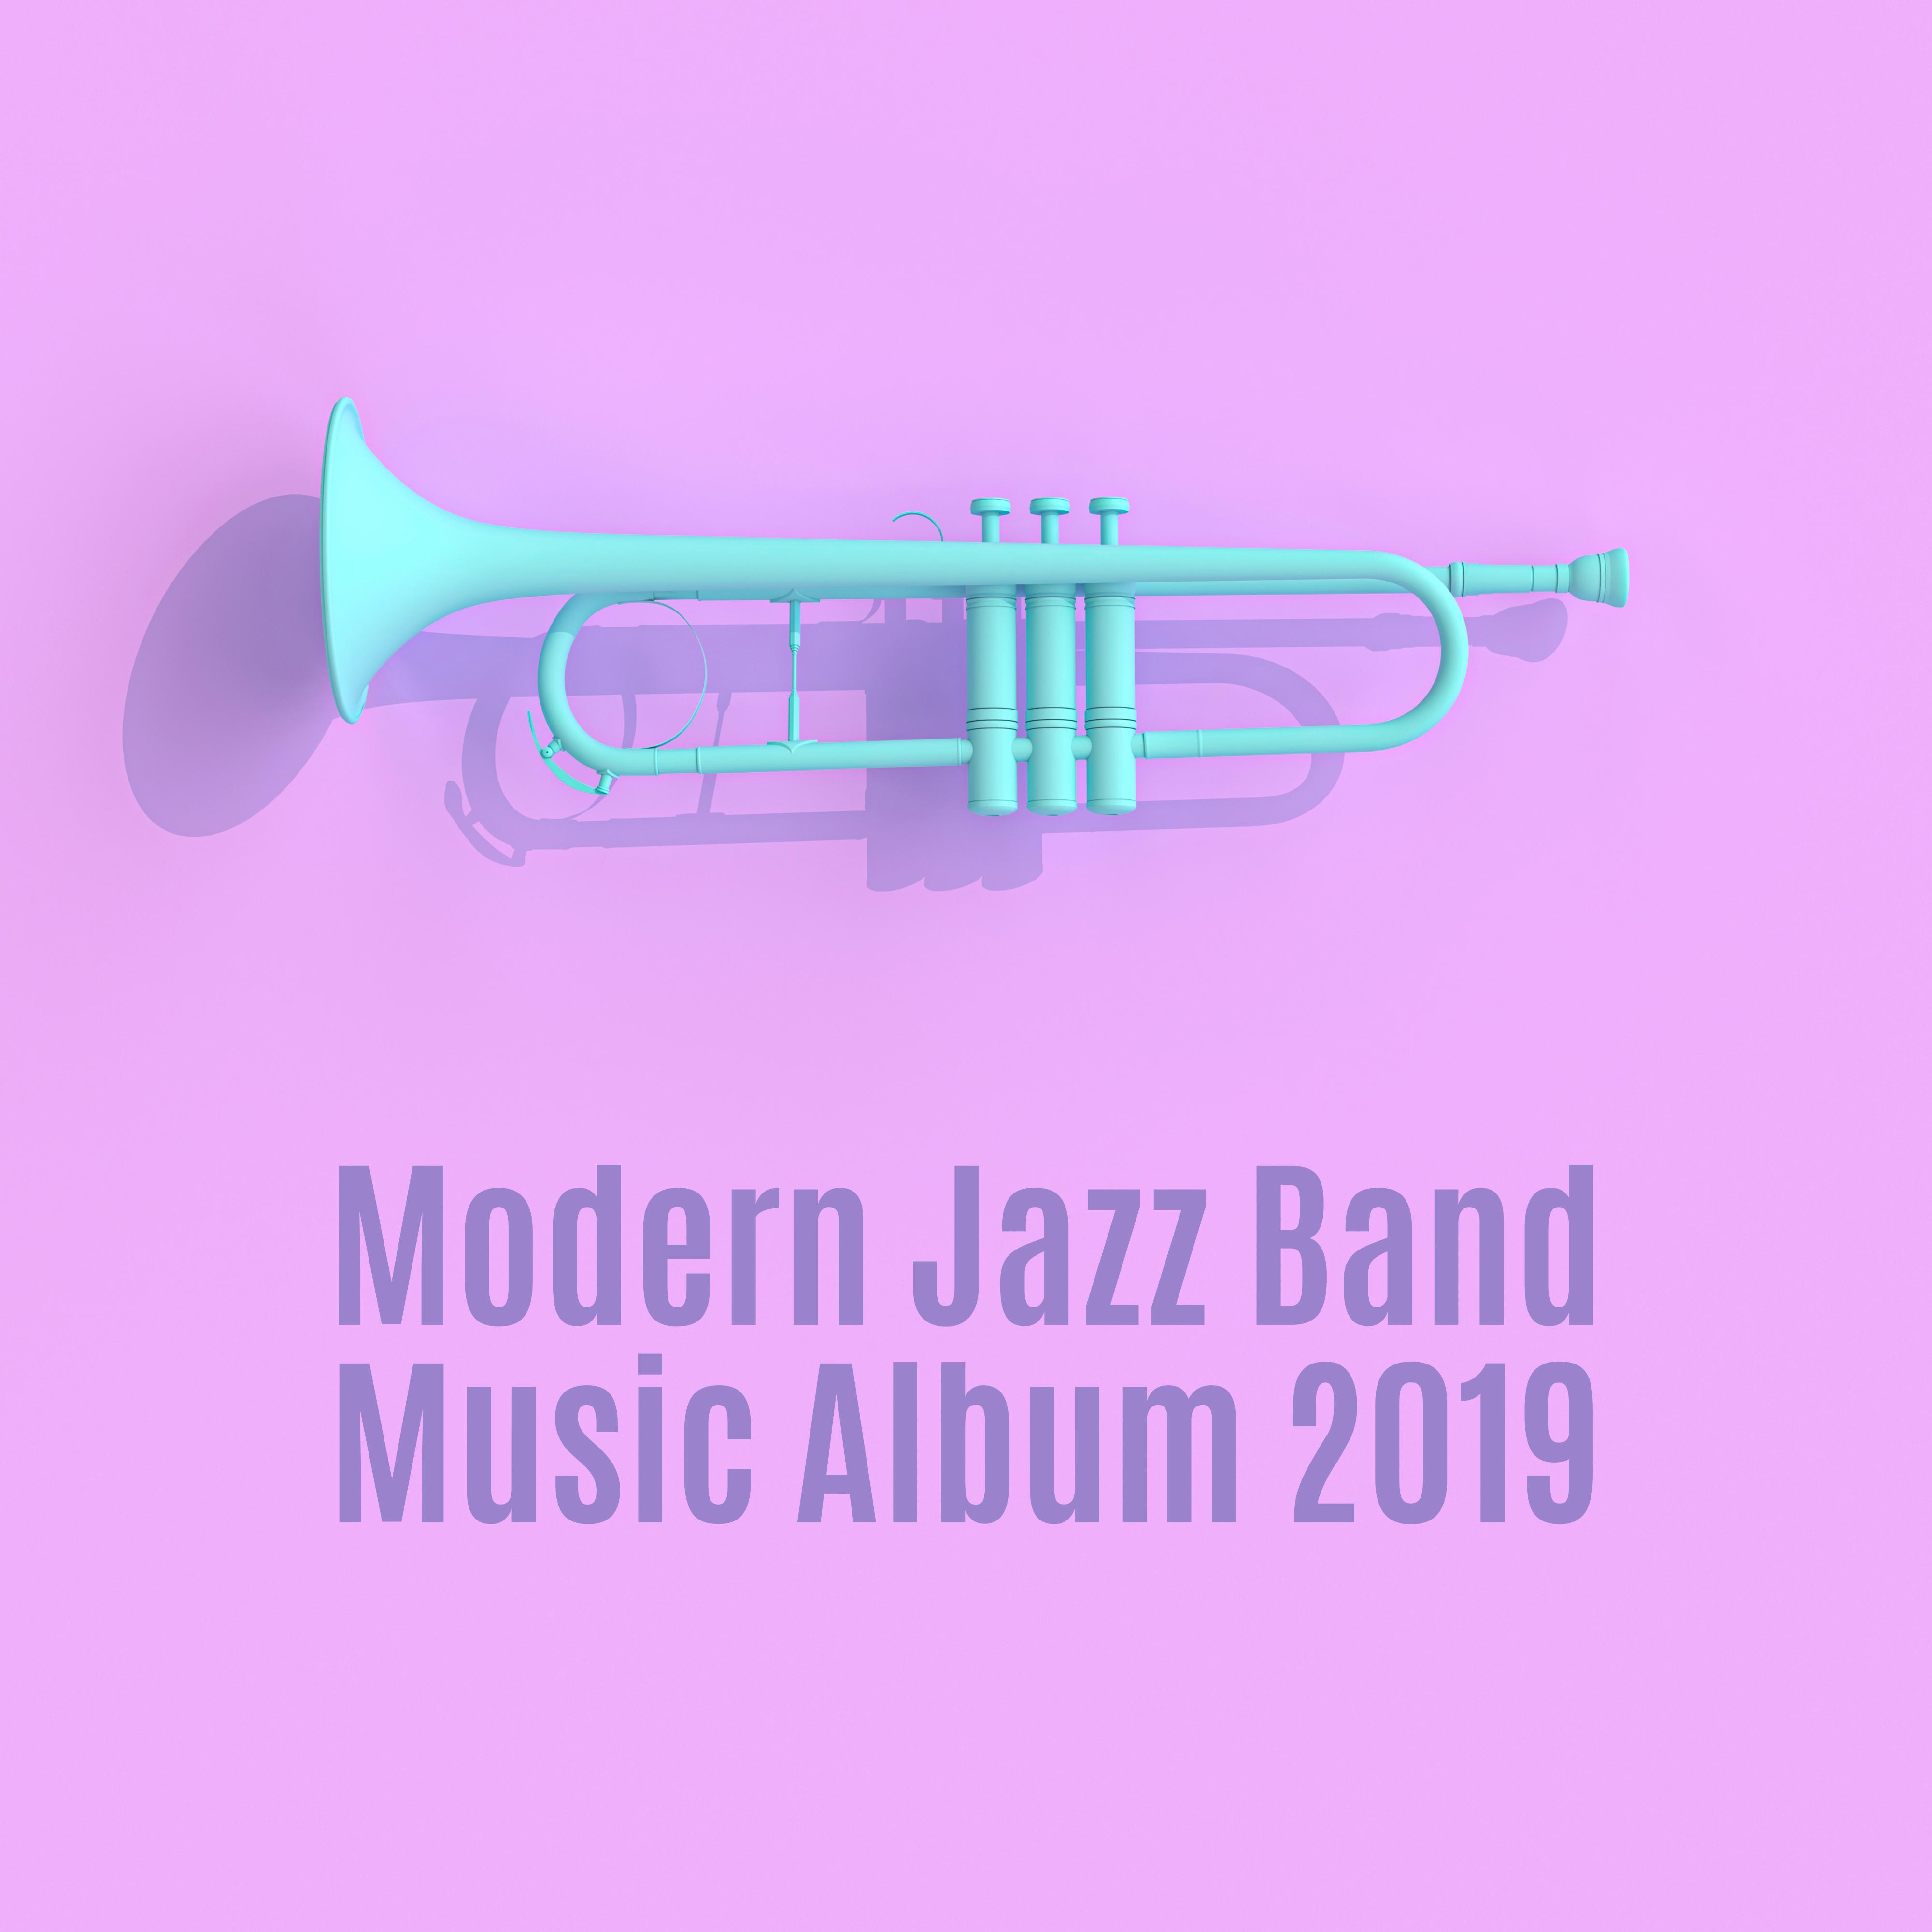 Modern Jazz Band Music Album 2019: Compilation of Smooth Jazz Instrumental Music, Modern Side of Jazz, Melodies Played on Piano, Contrabass, Guitar, Trumpet, Sax & Others